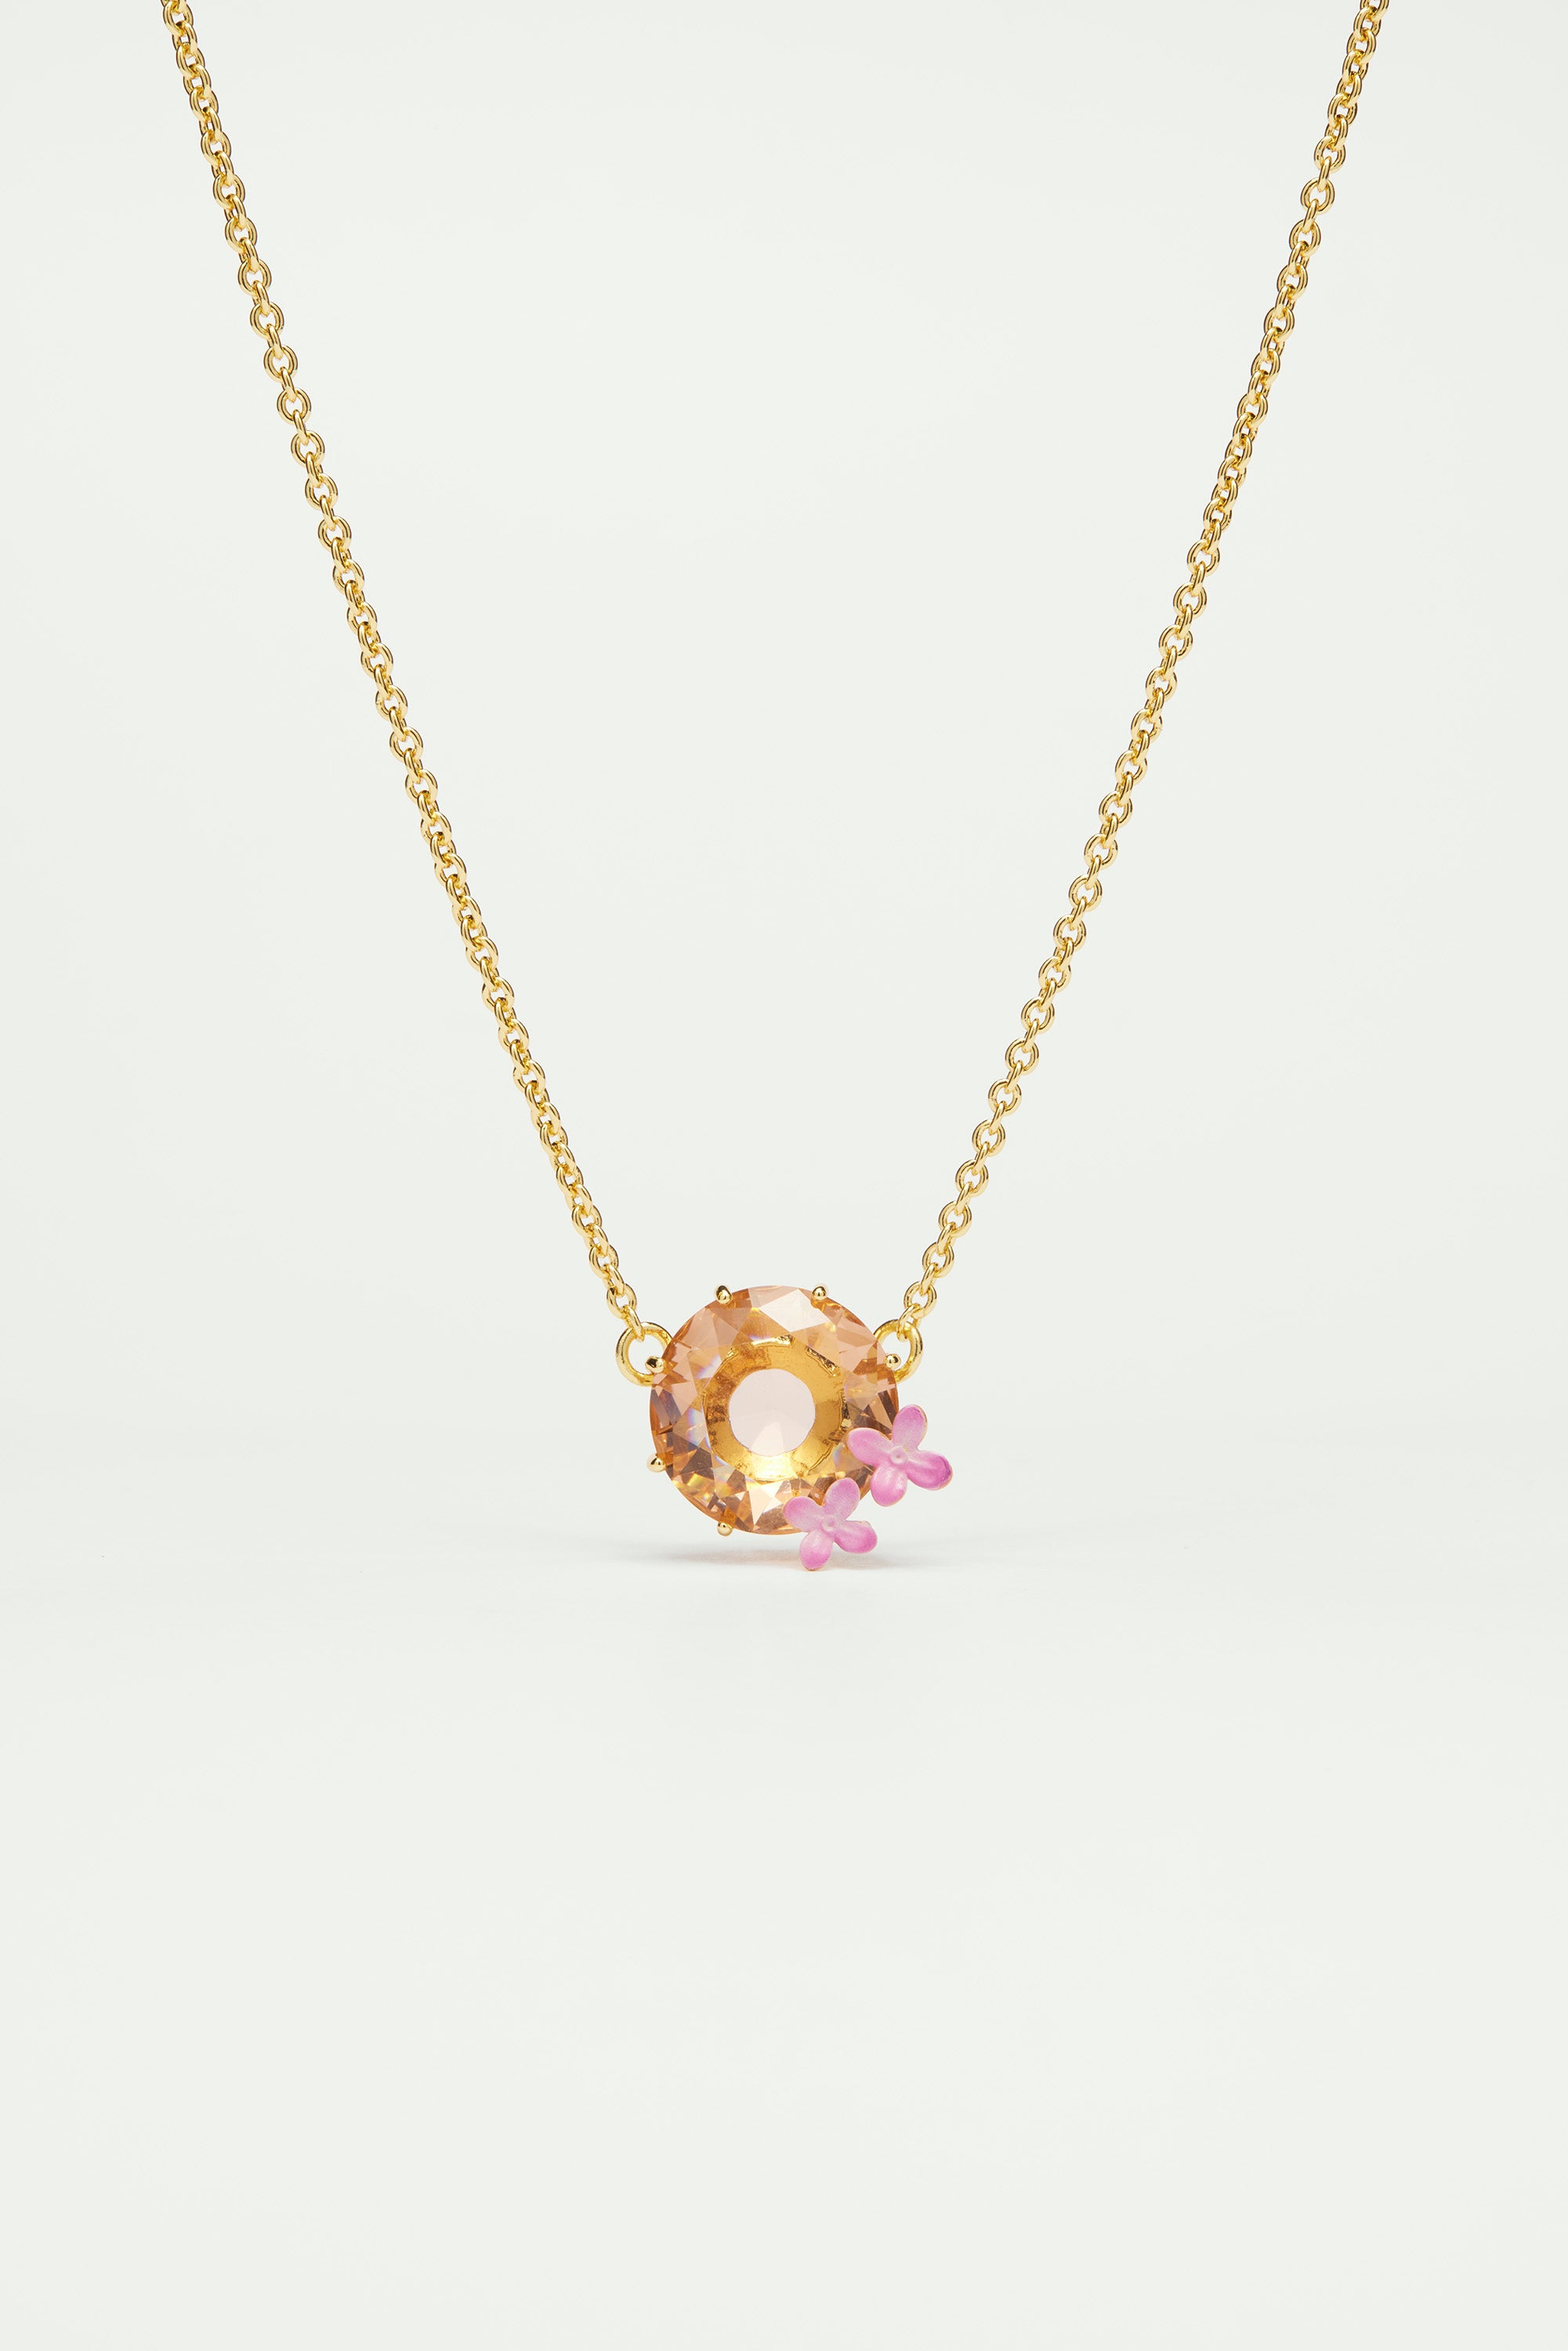 Apricot pink diamantine flower and round stone fine necklace